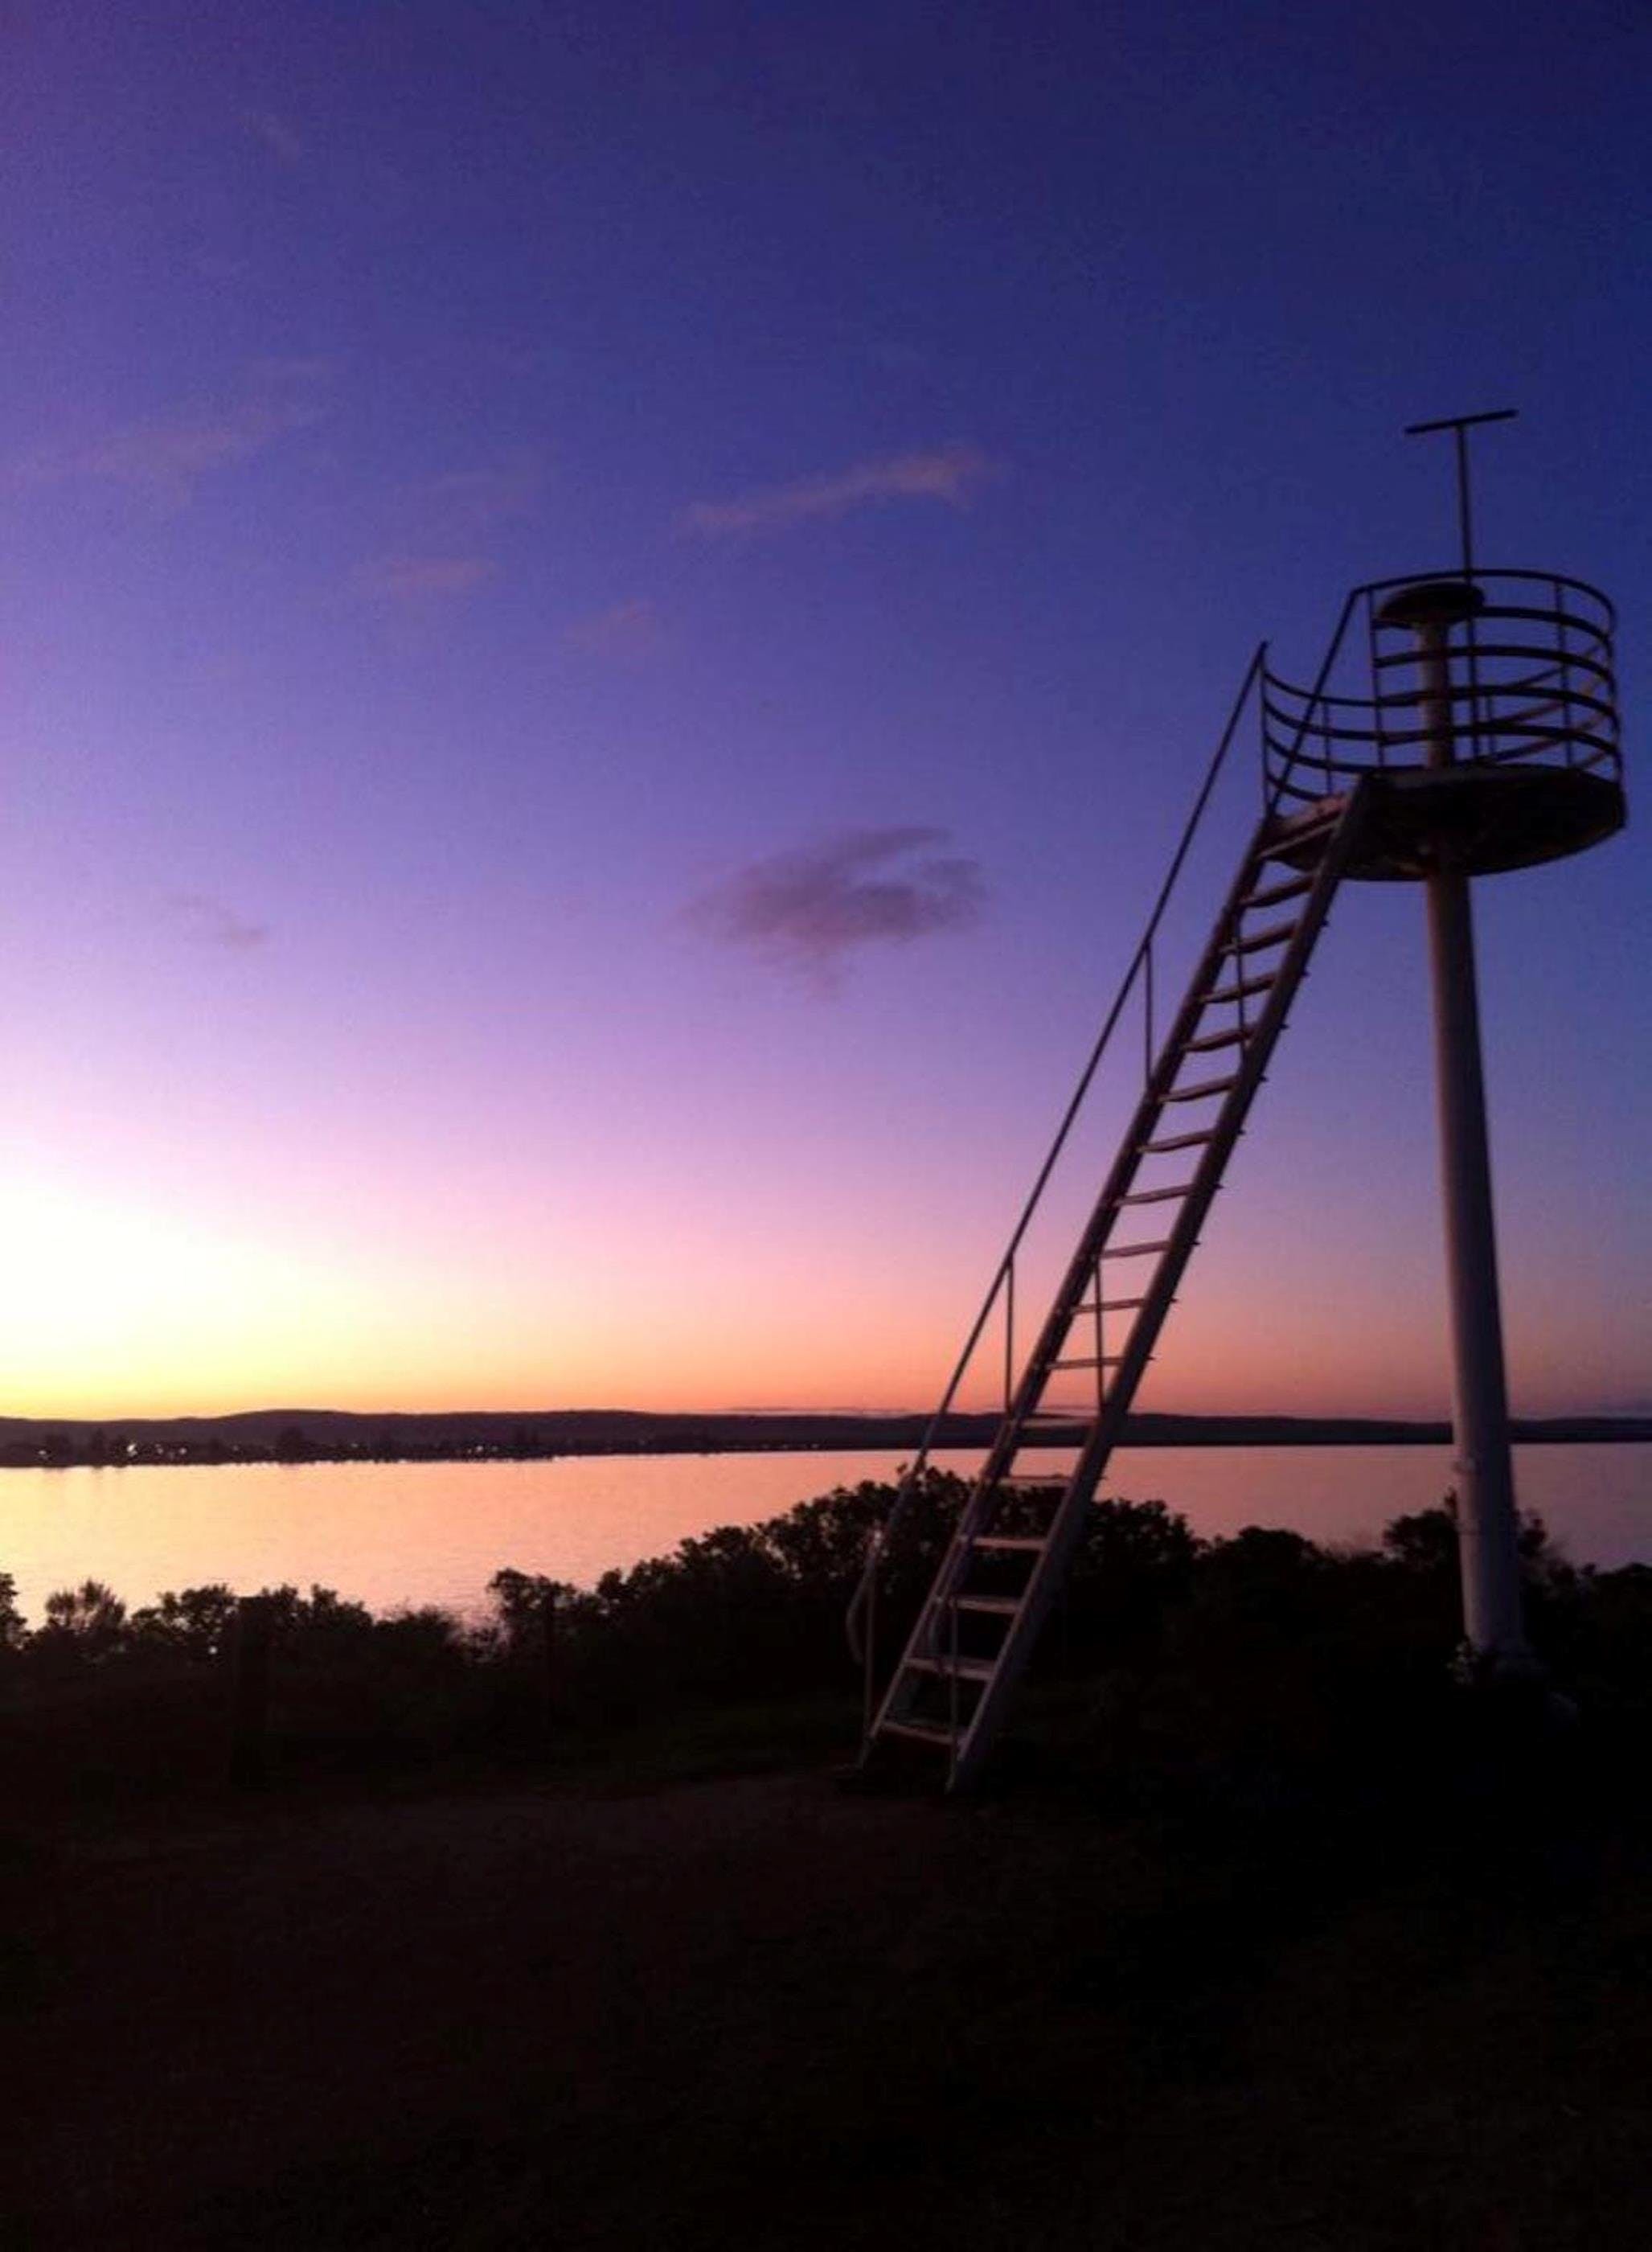 Island Lookout Tower And Reserve - Carnarvon Accommodation